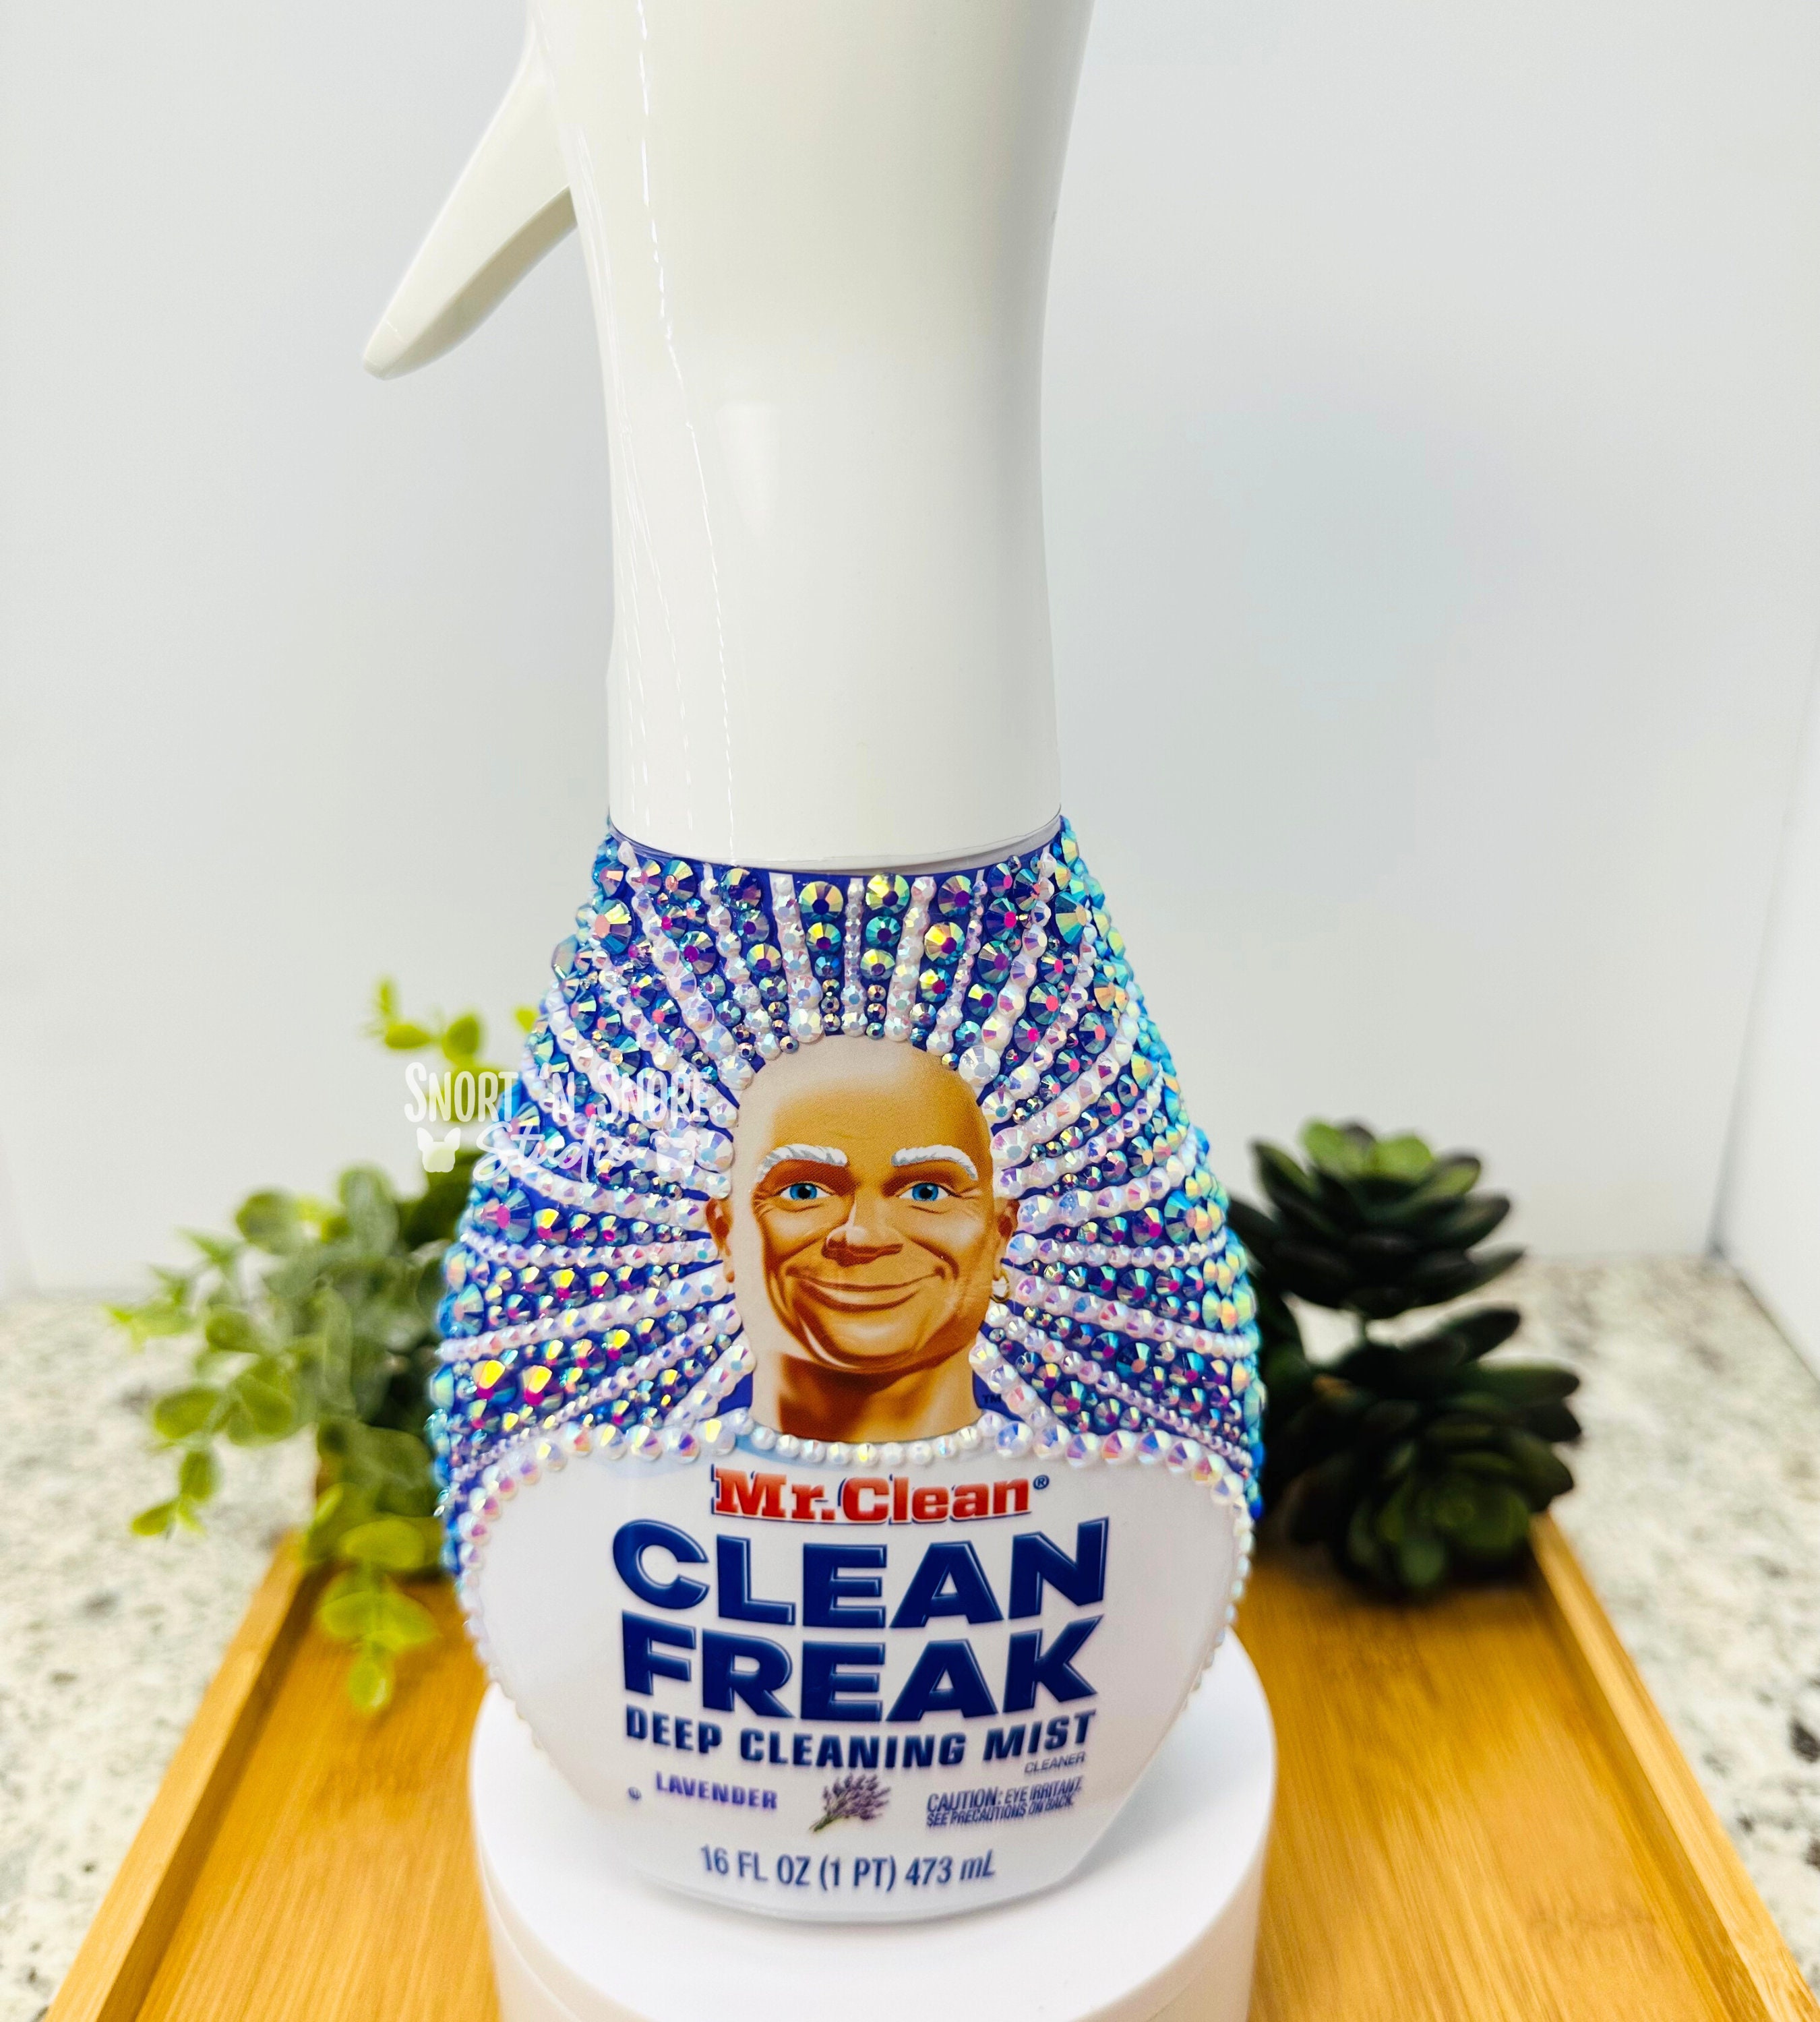 Stunning Bling Mr Clean Freak Clean in Glam Style Shine & Sparkle Your Home  